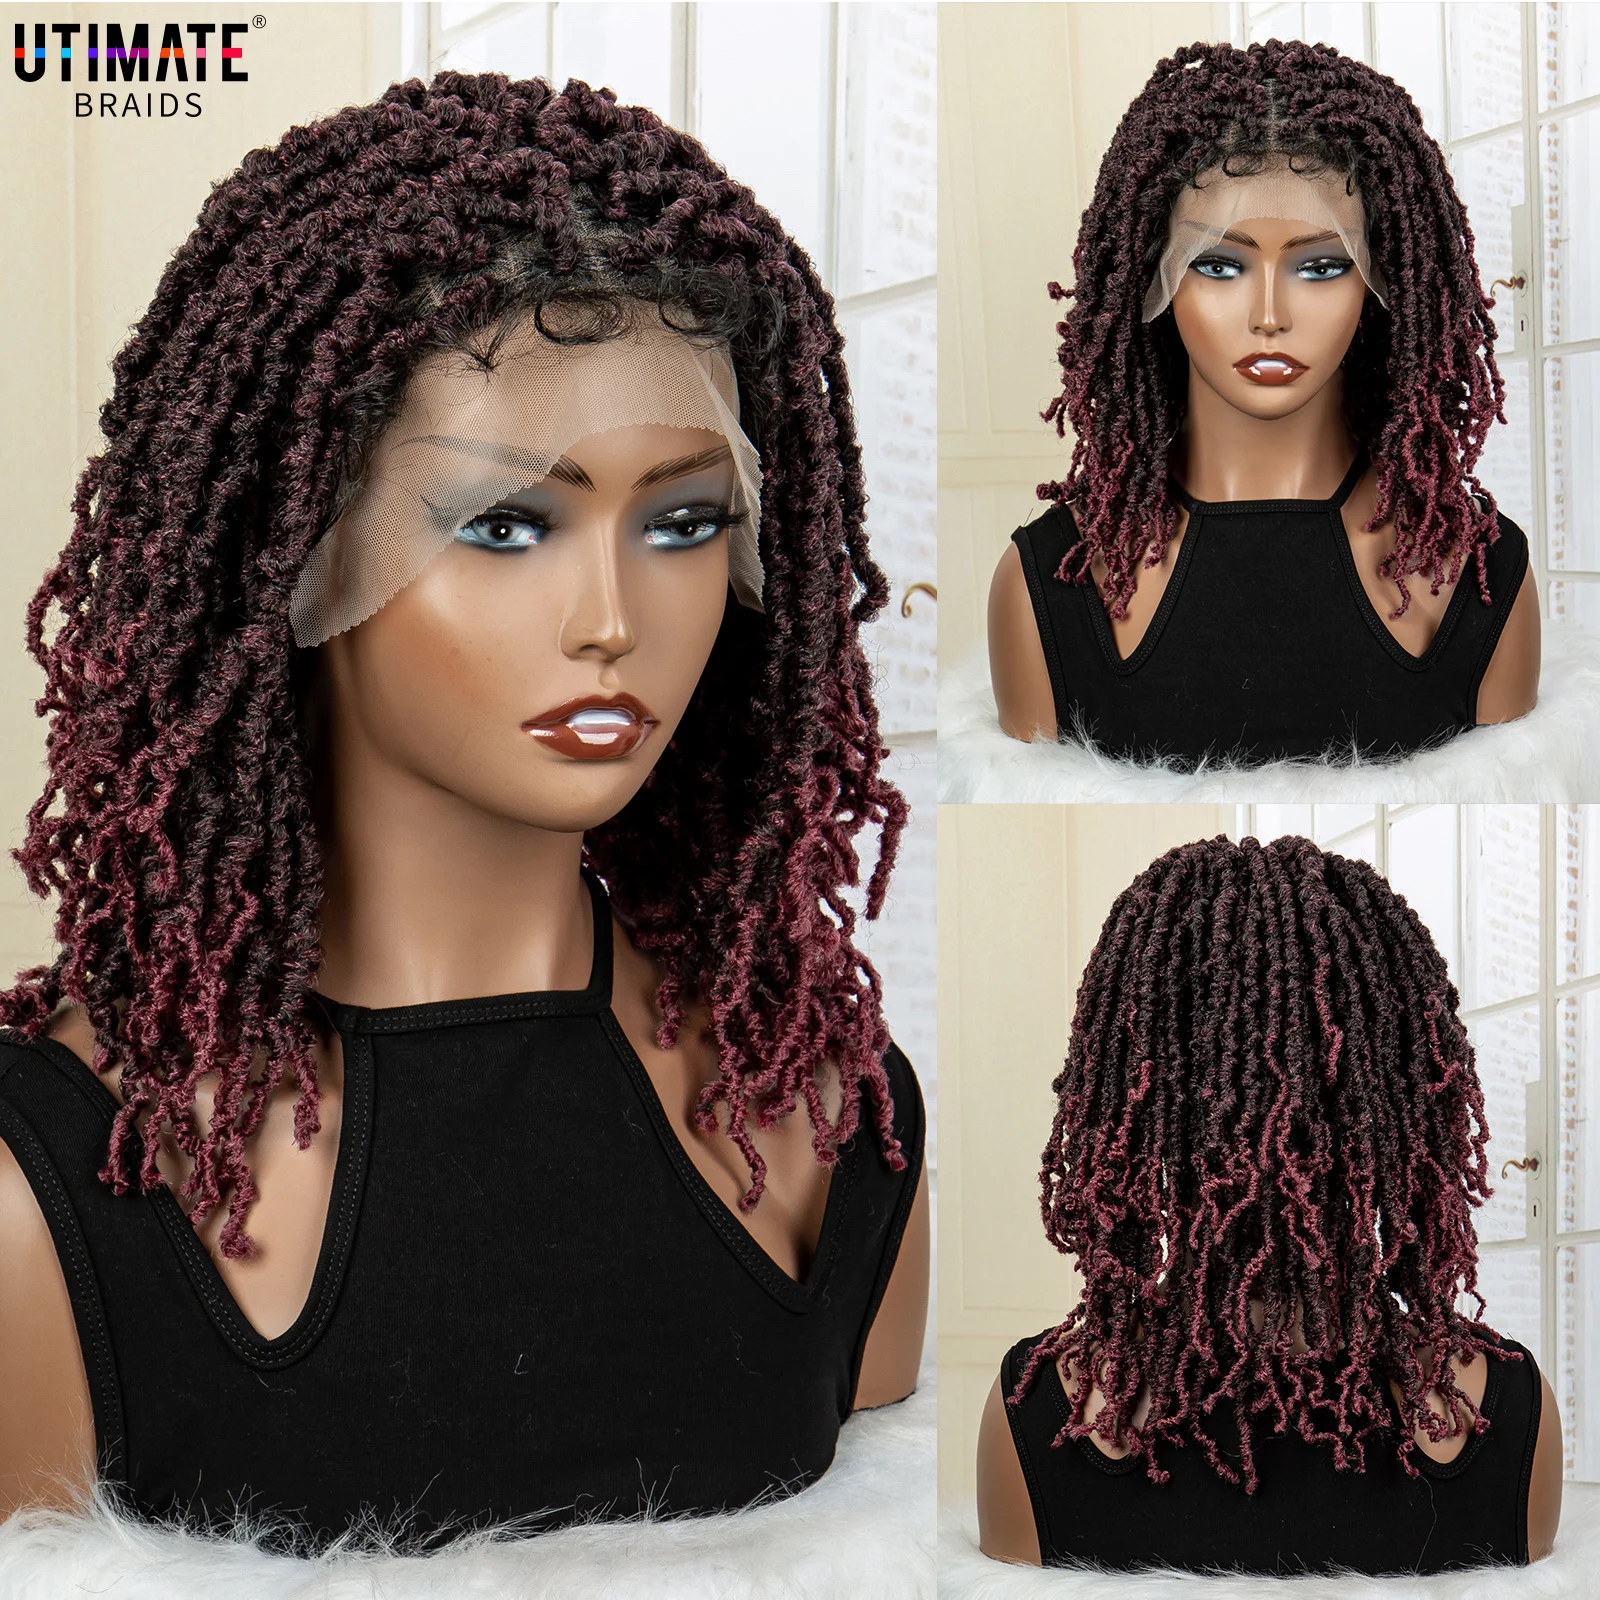 

Synthetic Dreadlocks Knotless Braided Wigs Lace Frontal Wig for Black Women Short Bob 14 Inches Locs Crochets Braiding Wigs